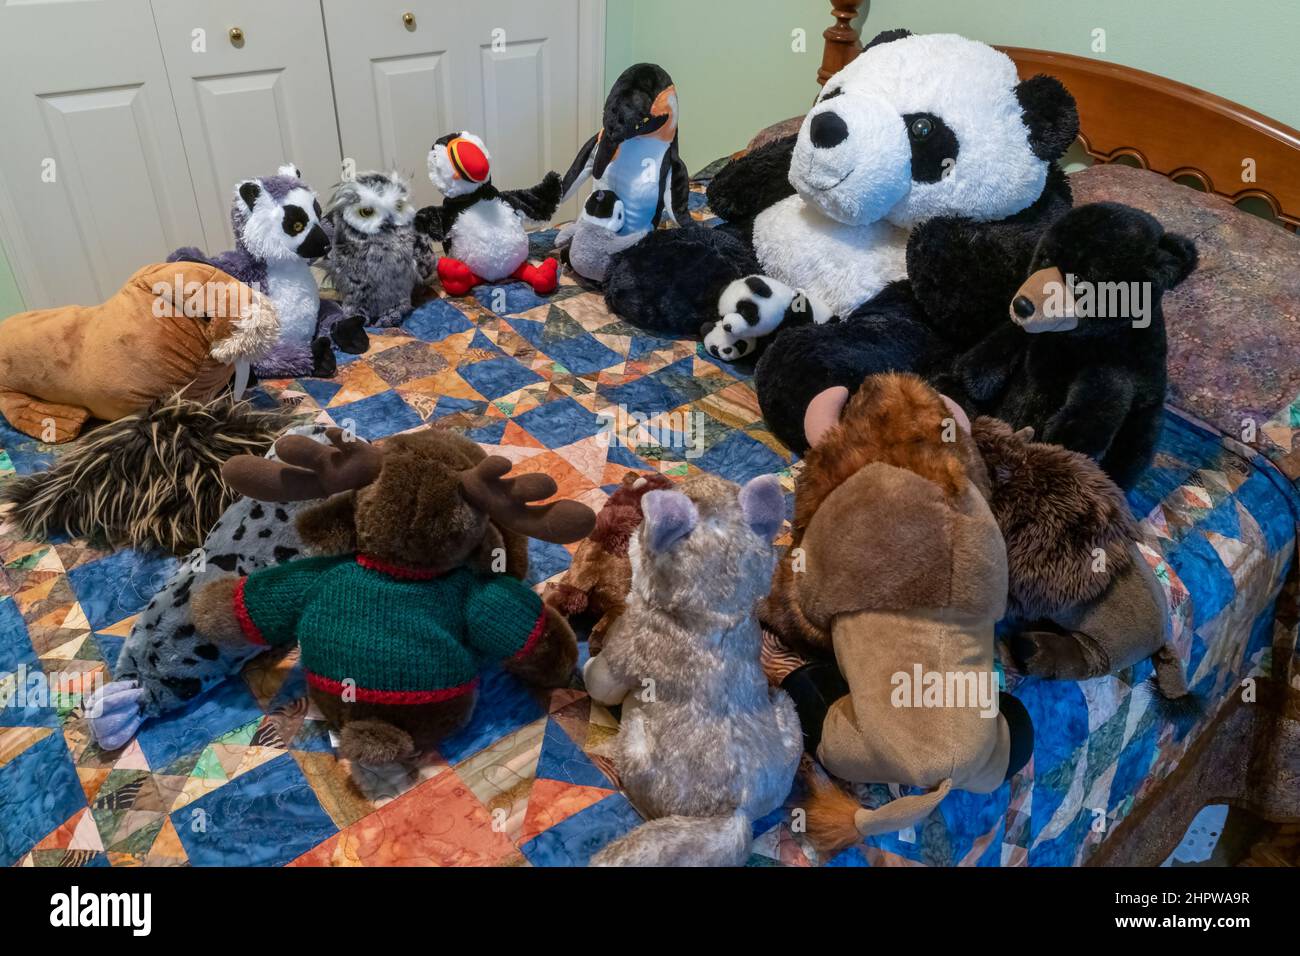 Stuffed animals gathered for story-telling time on a bed. Stock Photo